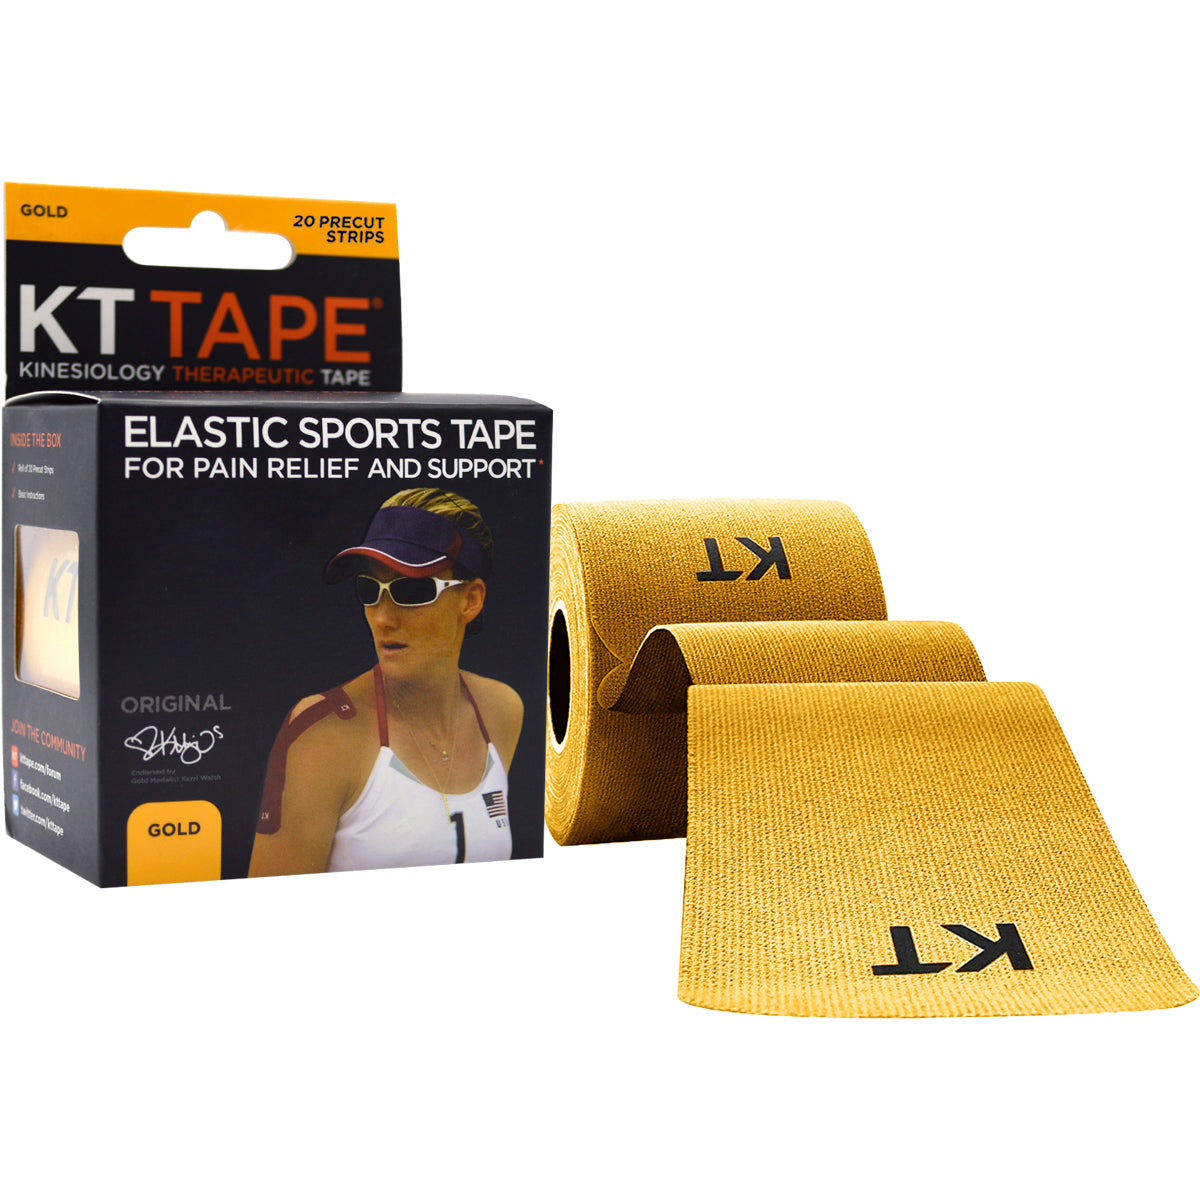 KT Tape Cotton 10" Precut Kinesiology Therapeutic Sports Roll, 20 Strips, Gold KT Tape